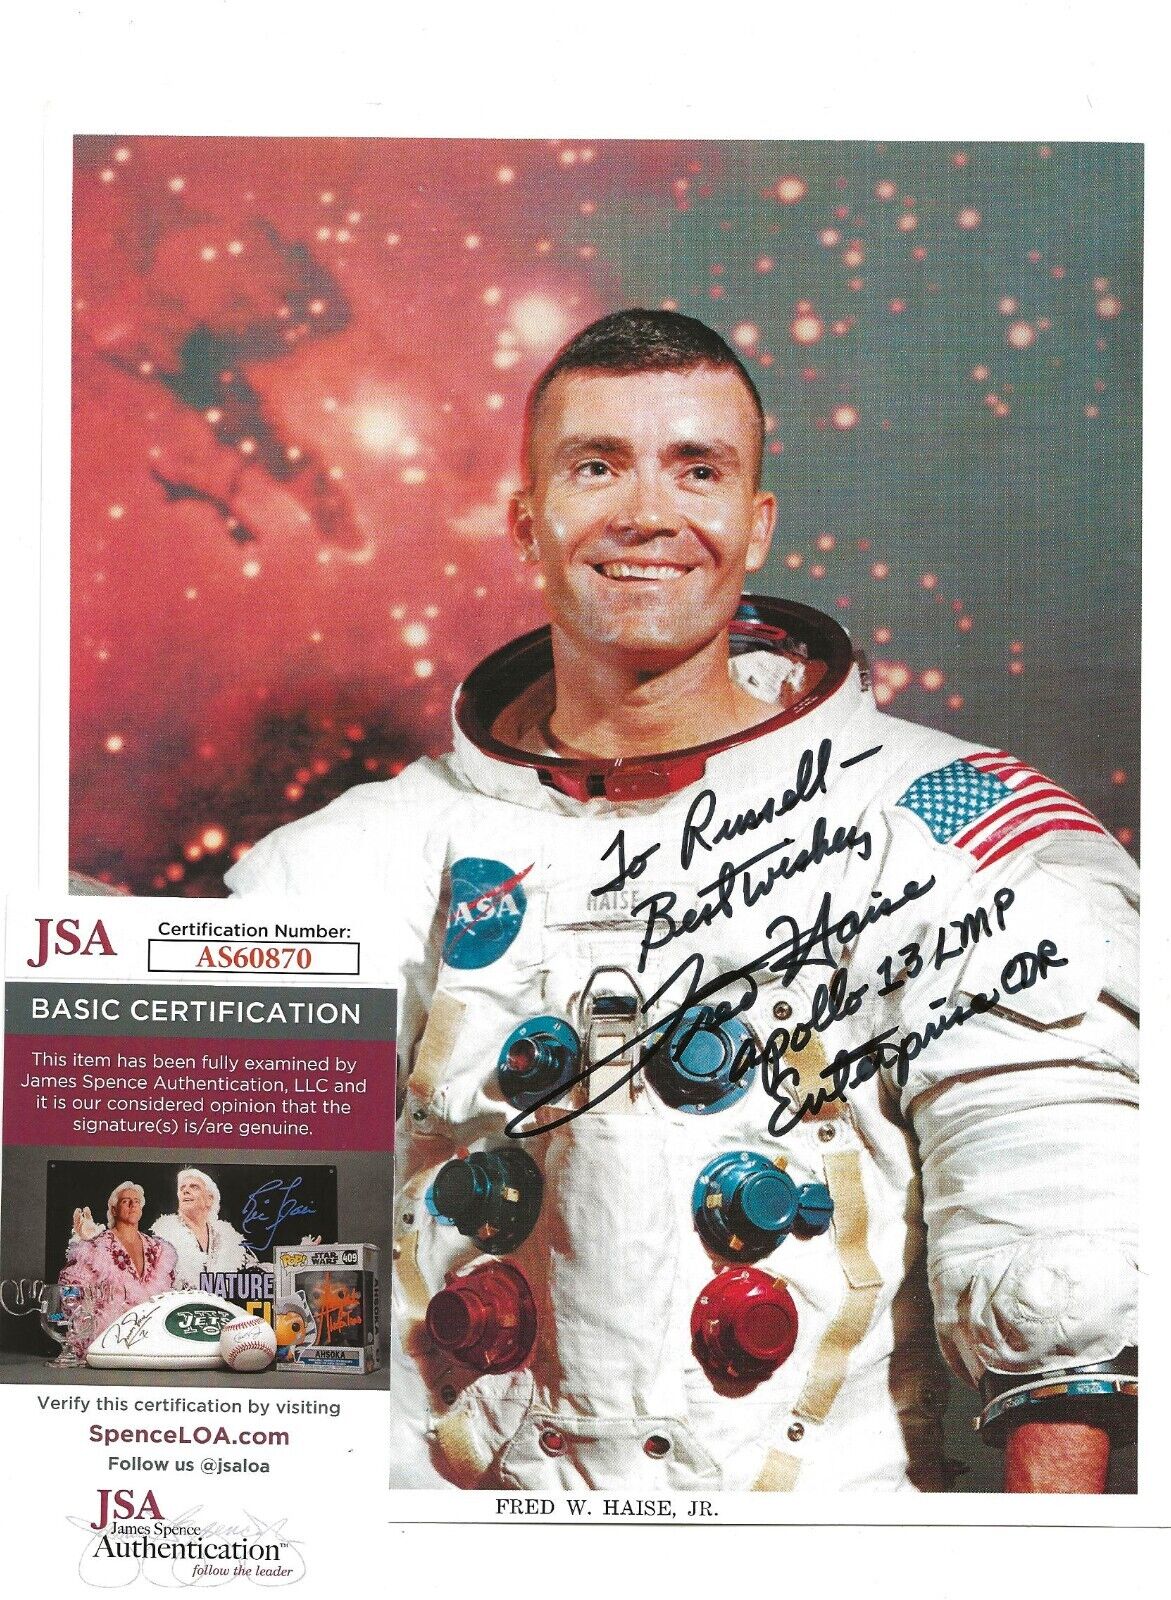 FRED HAISE signed autographed official NASA photo JSA Apollo 